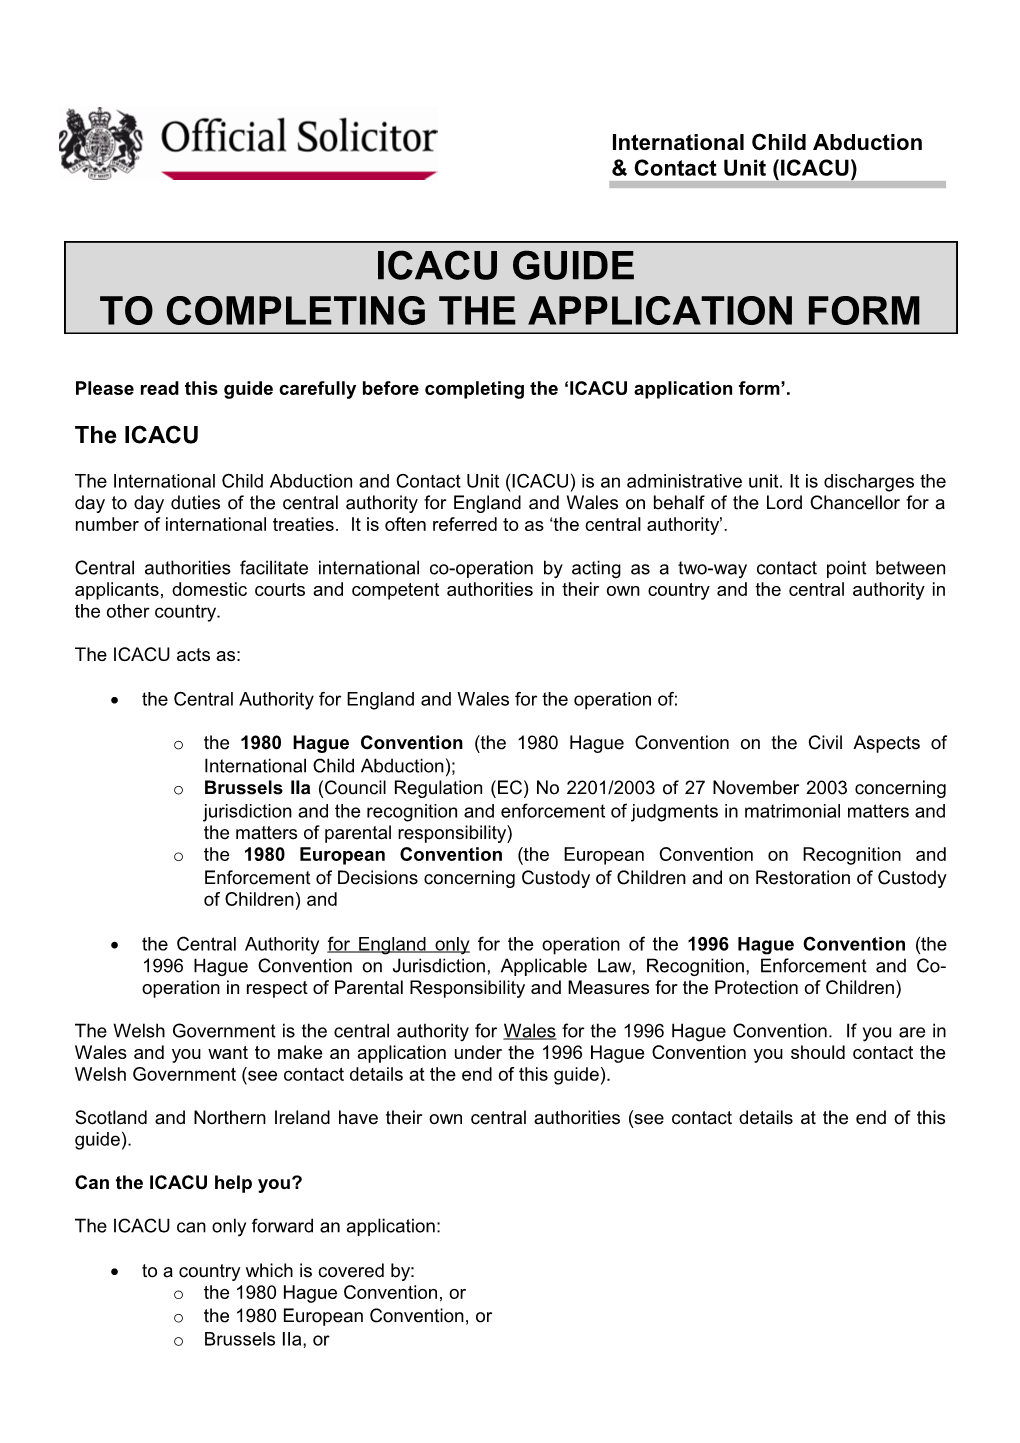 Please Read This Guide Carefully Before Completing the ICACU Application Form